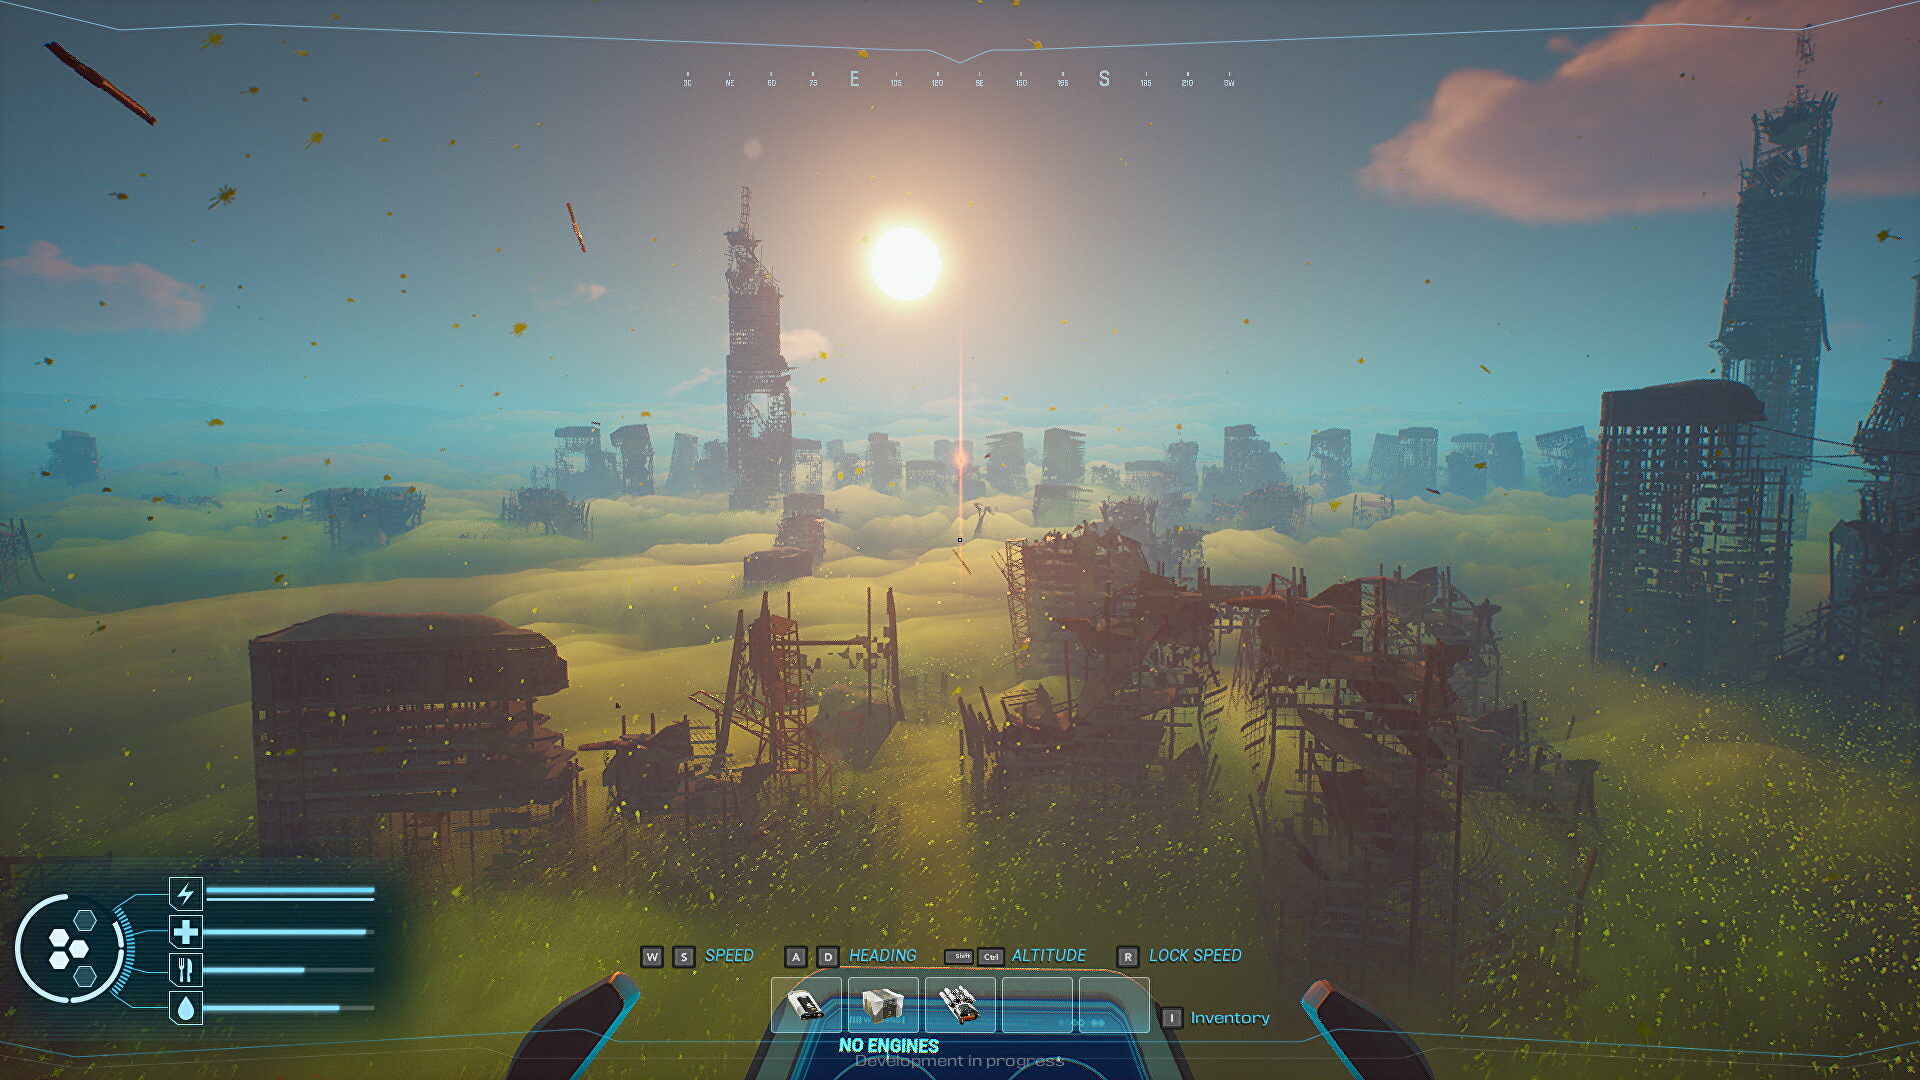 Airborne survival game Forever Skies sets you on a course to find a cure for humanity in its toxic cloud sea